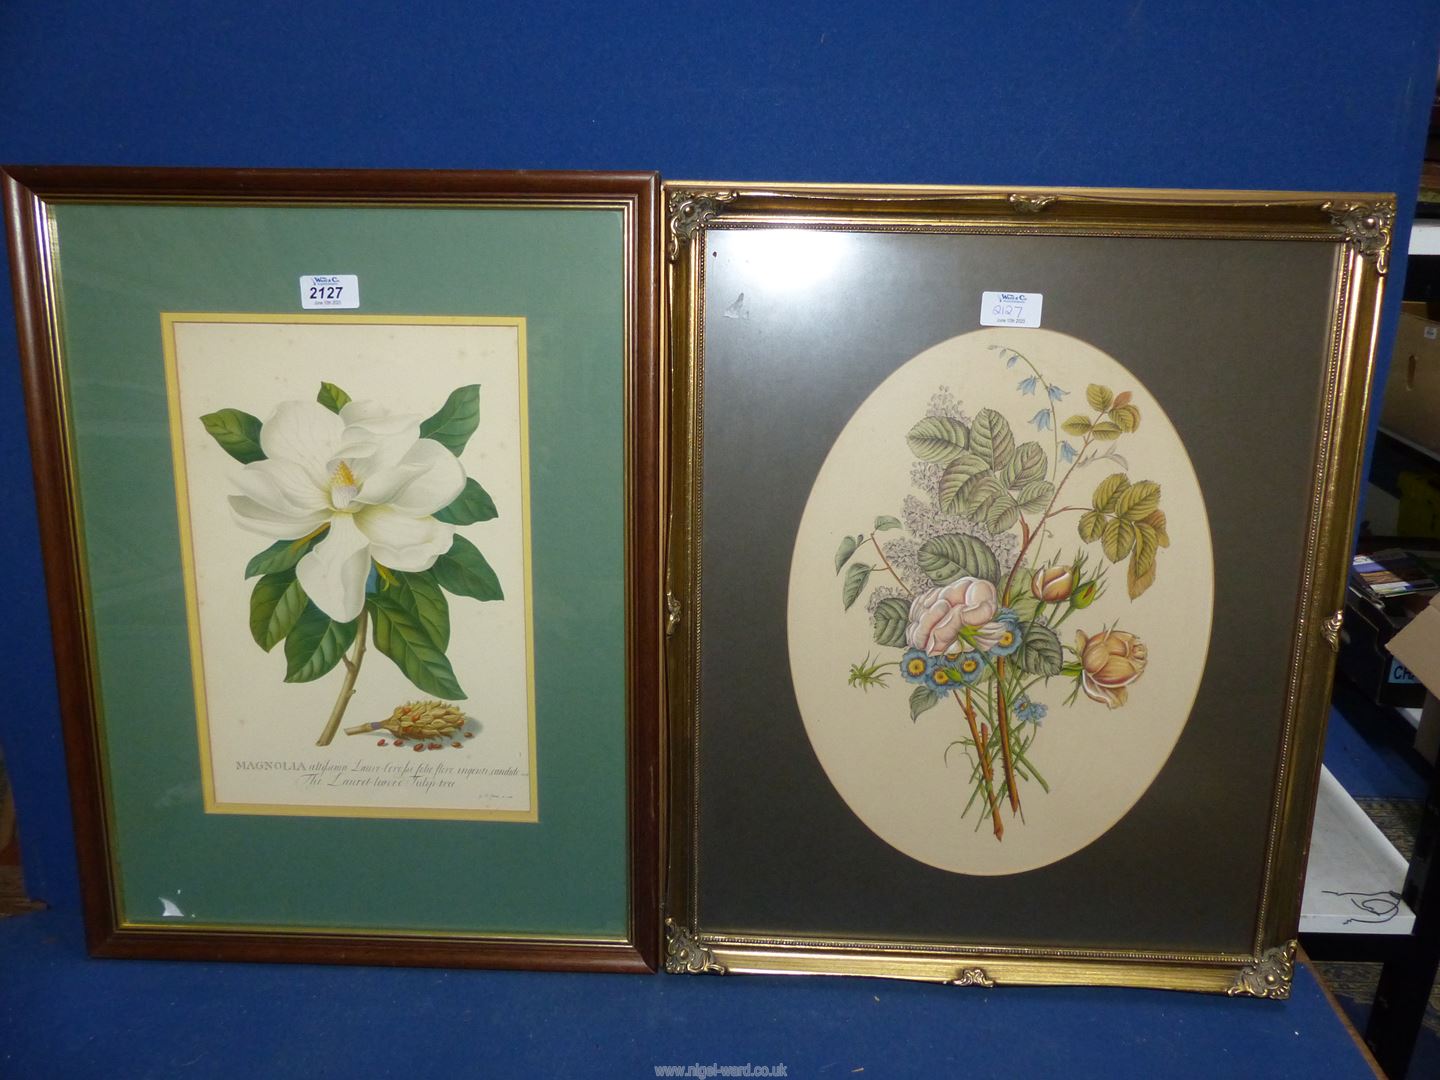 A framed and mounted Print depicting Magnolia,